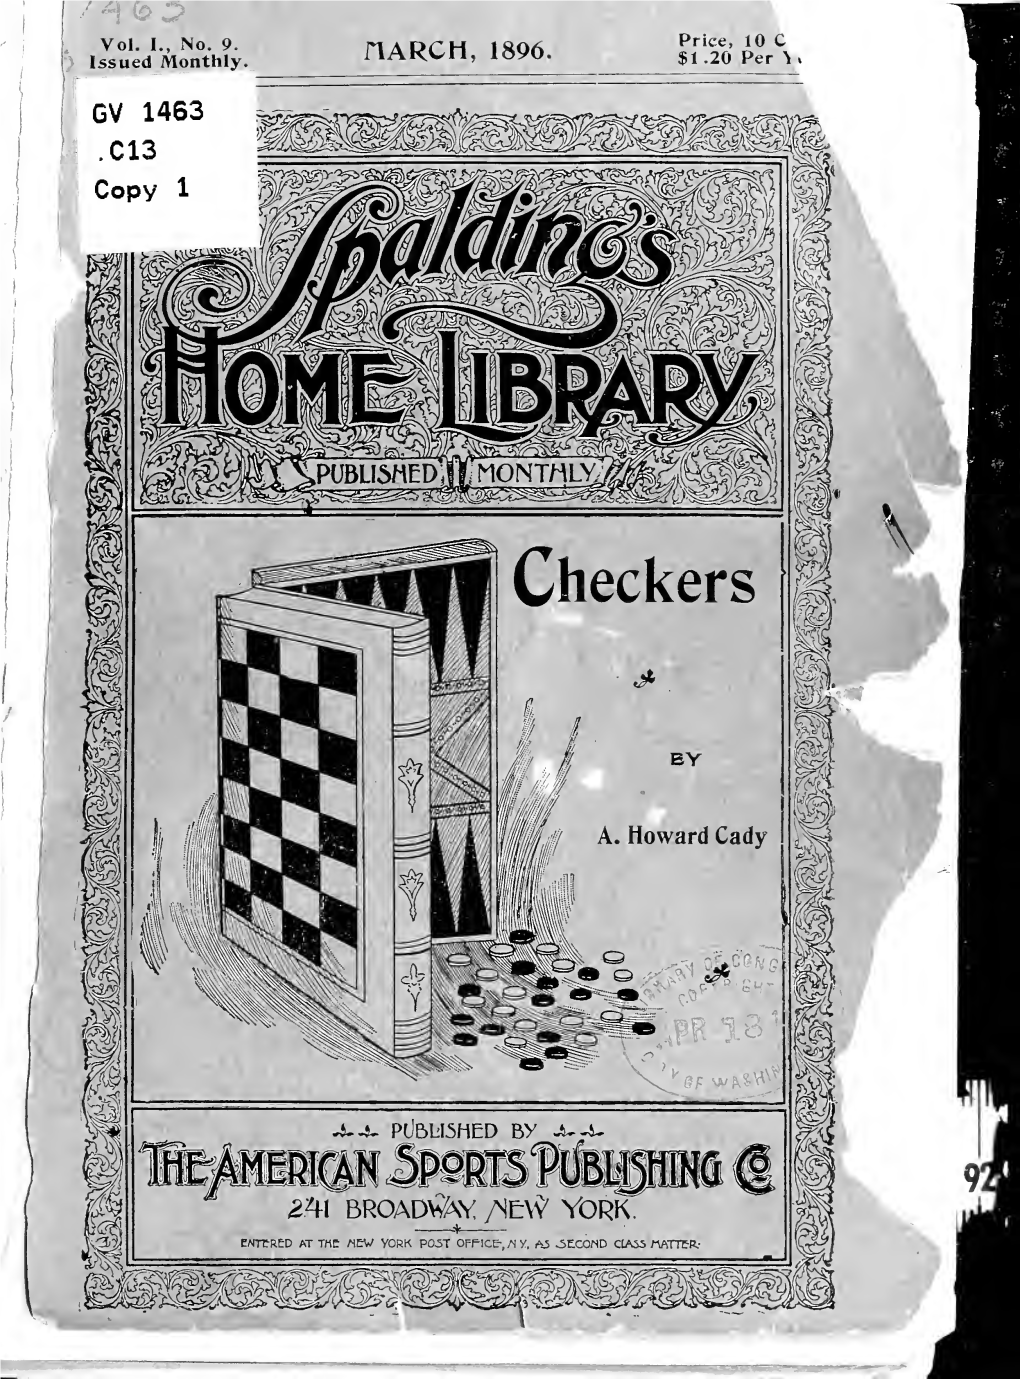 CHECKERS ^ a TREATISE on the GAME Wllh INTRODUCTORY CHAPTER CONTAININING SOME NOTES REGARD